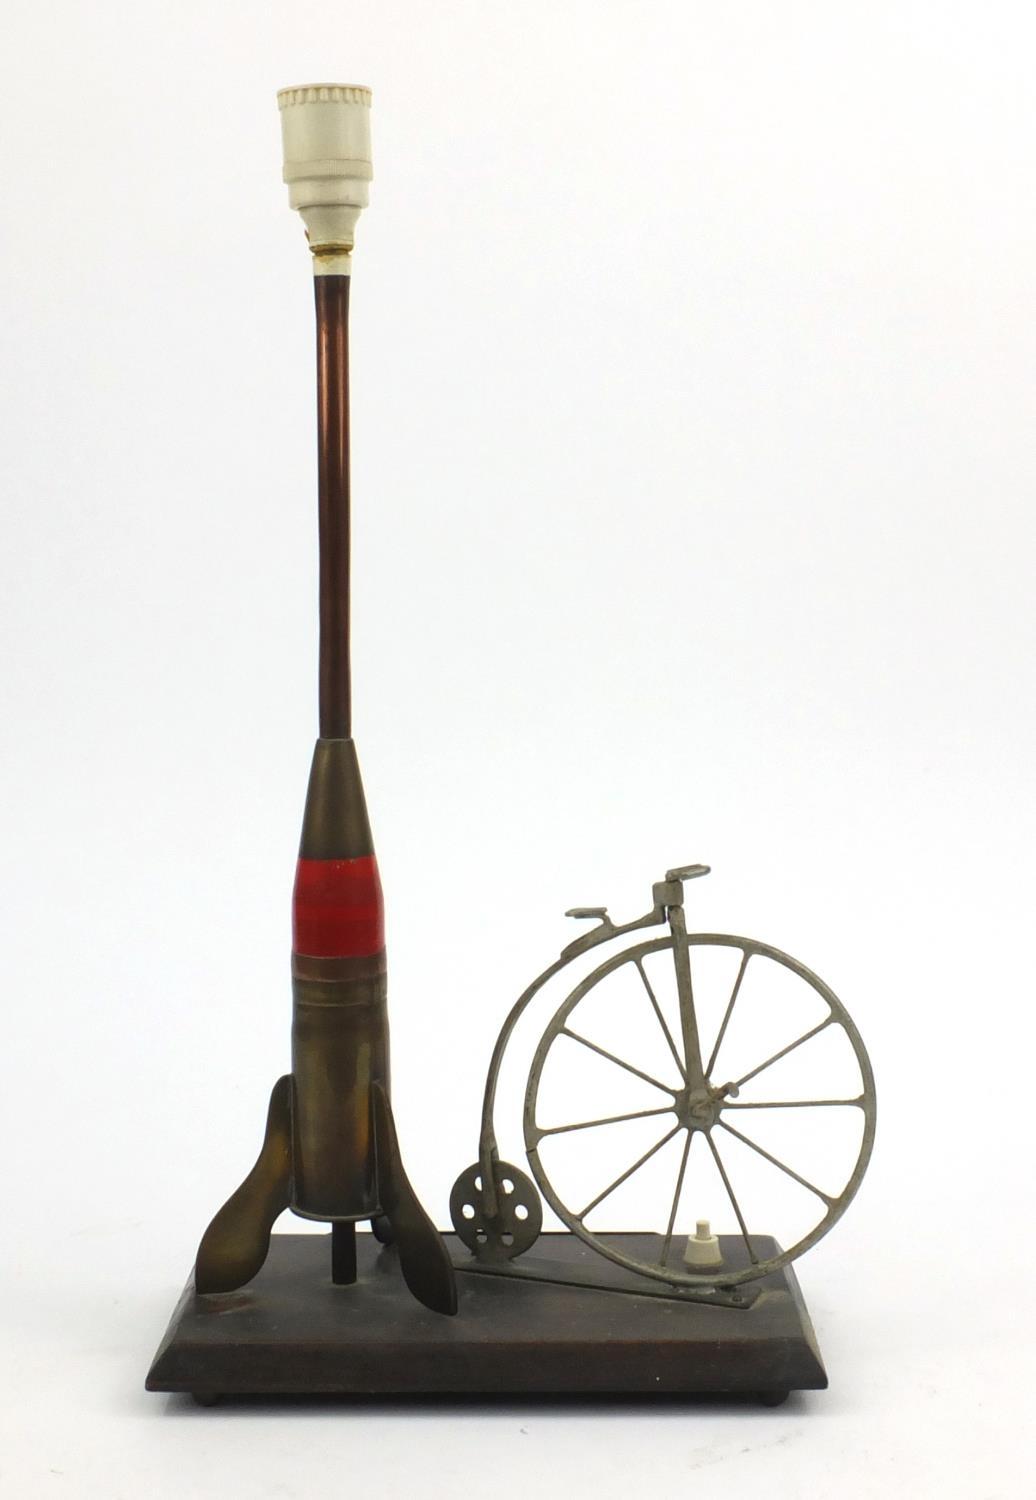 Military interest trench art table light titled 'Travel Through The Ages', raised on an oak base, - Image 7 of 11